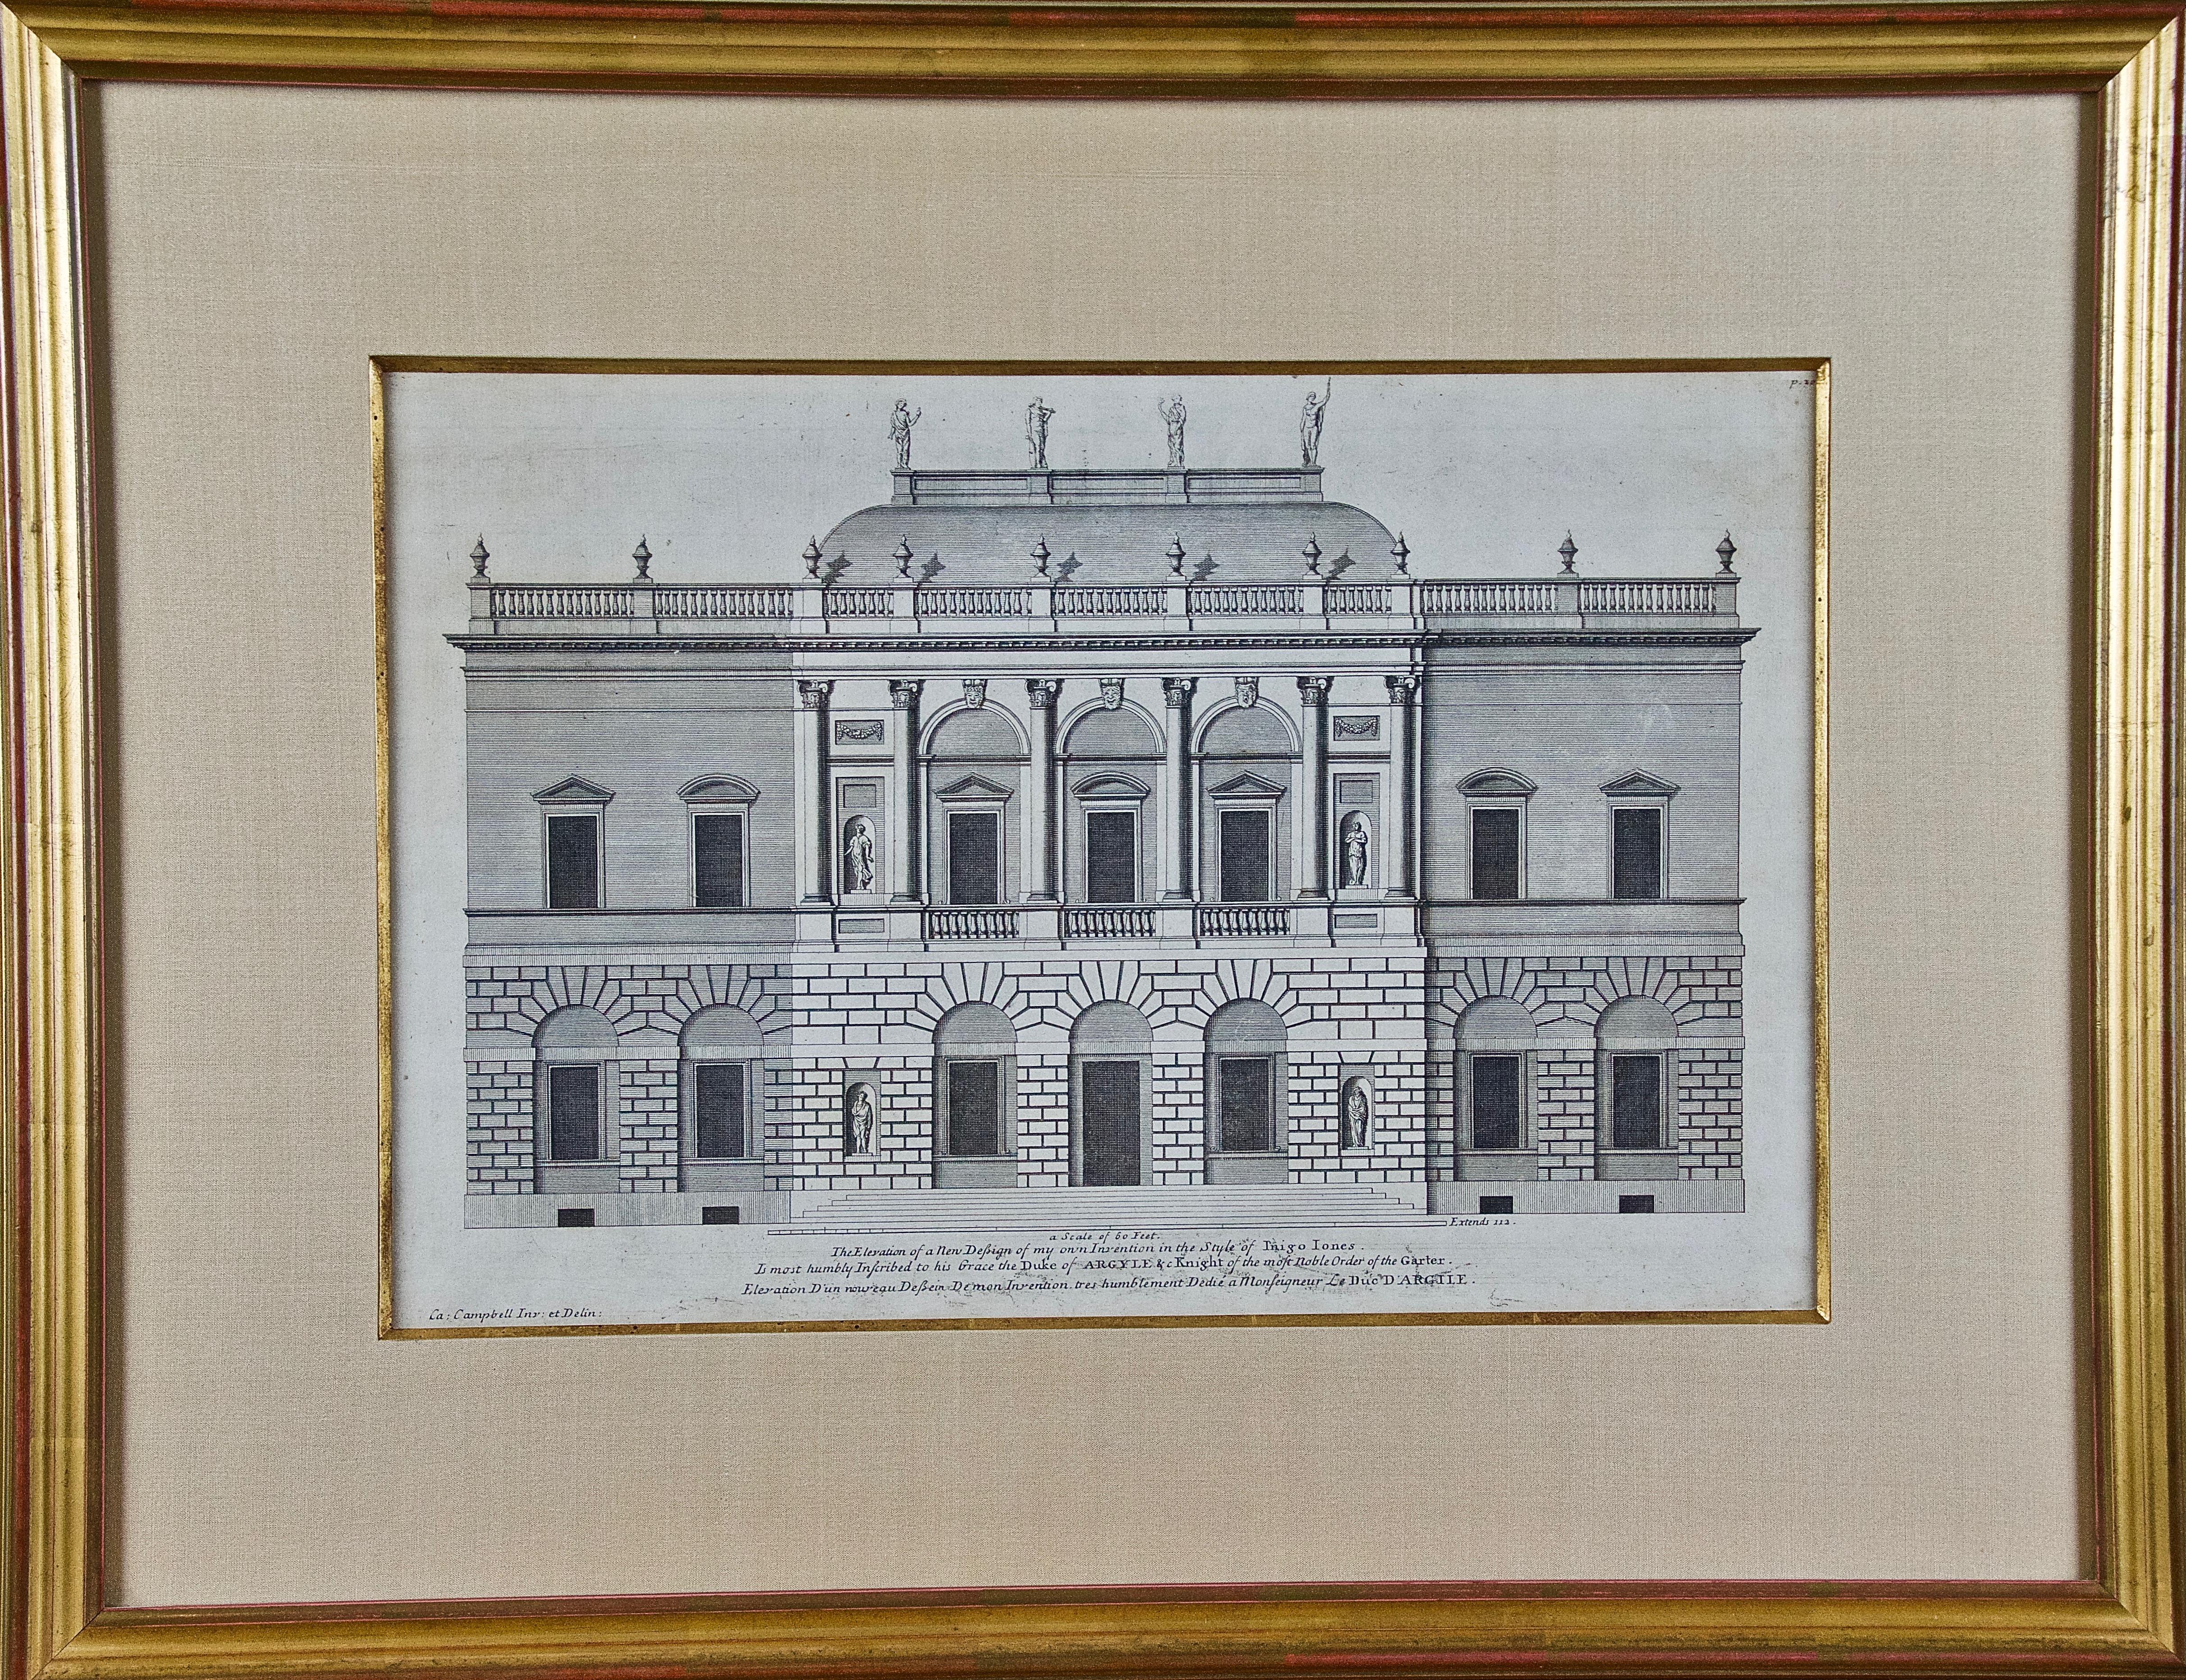 18th C. Architectural Engraving from "Vitruvius Britannicus" by Colen Campbell 